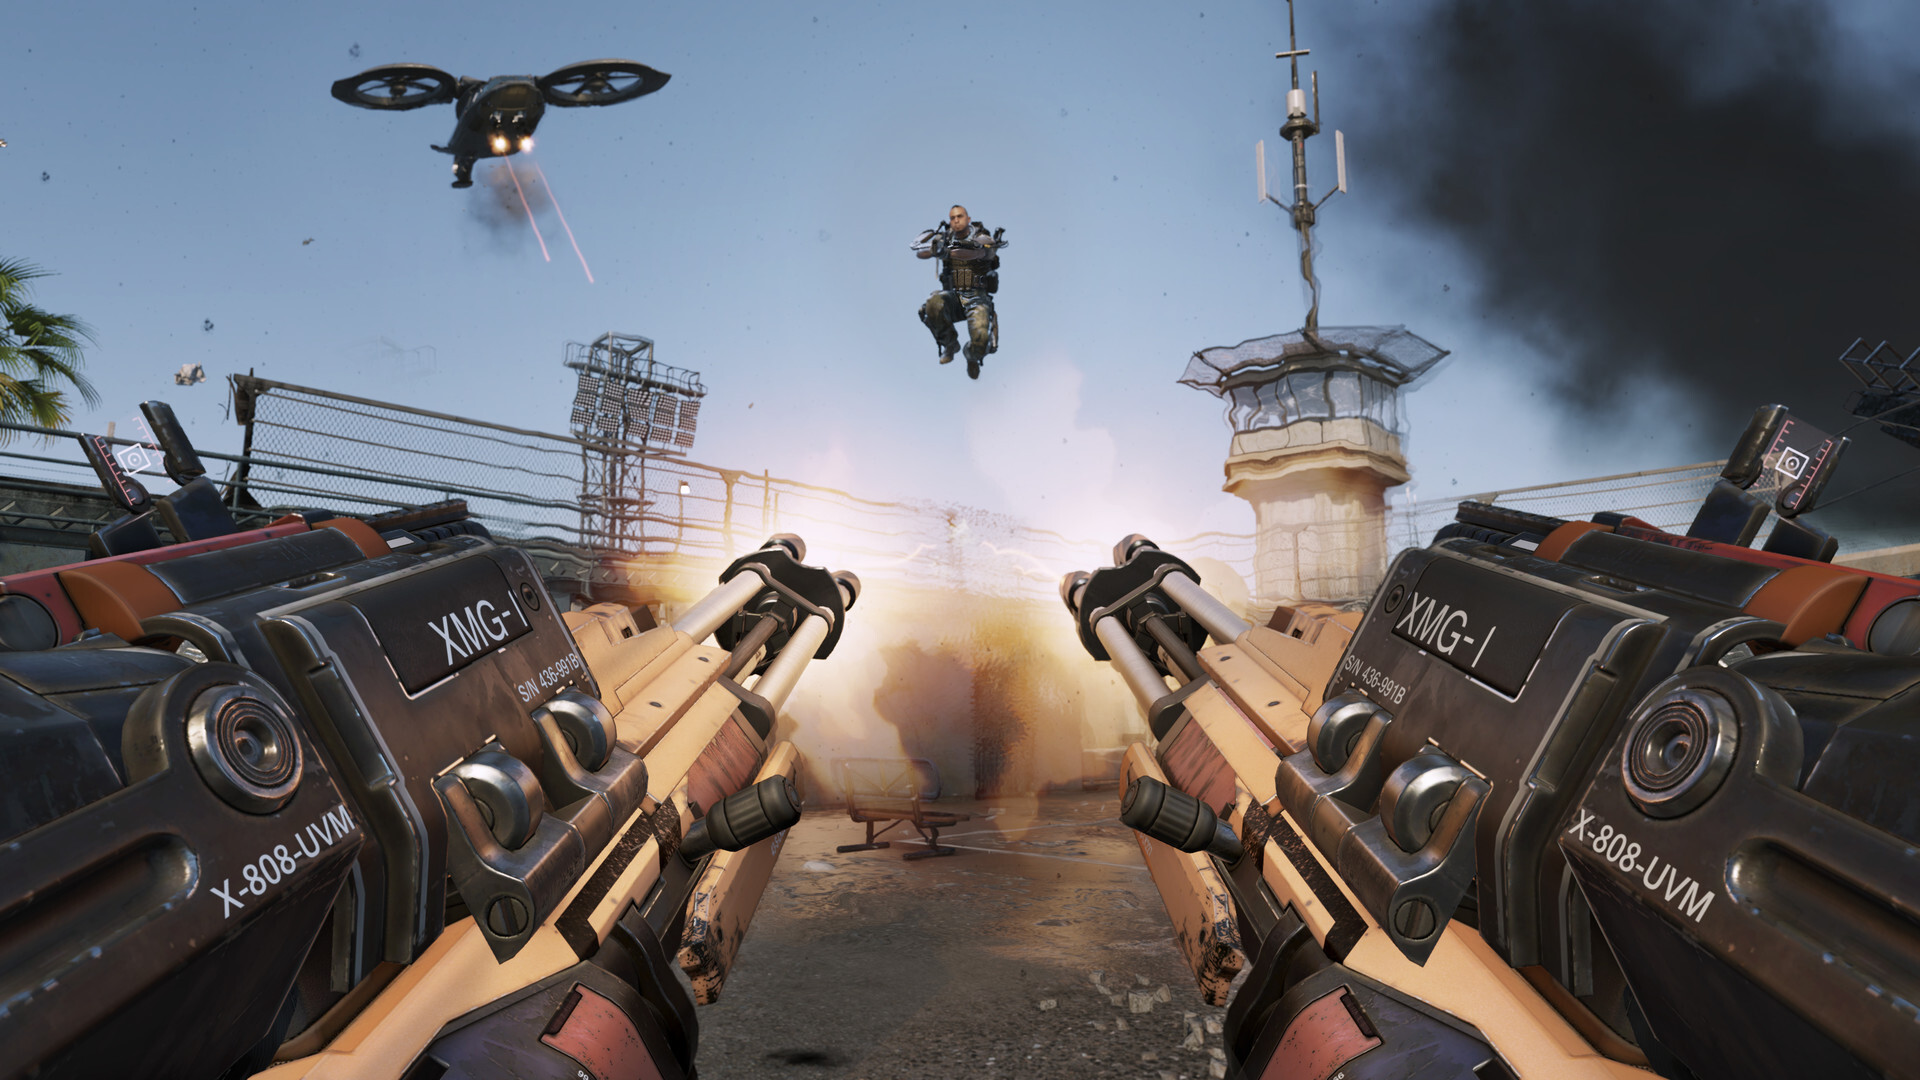 Call of Duty: Advanced Warfare (PC) CD key for Steam - price from $10.33